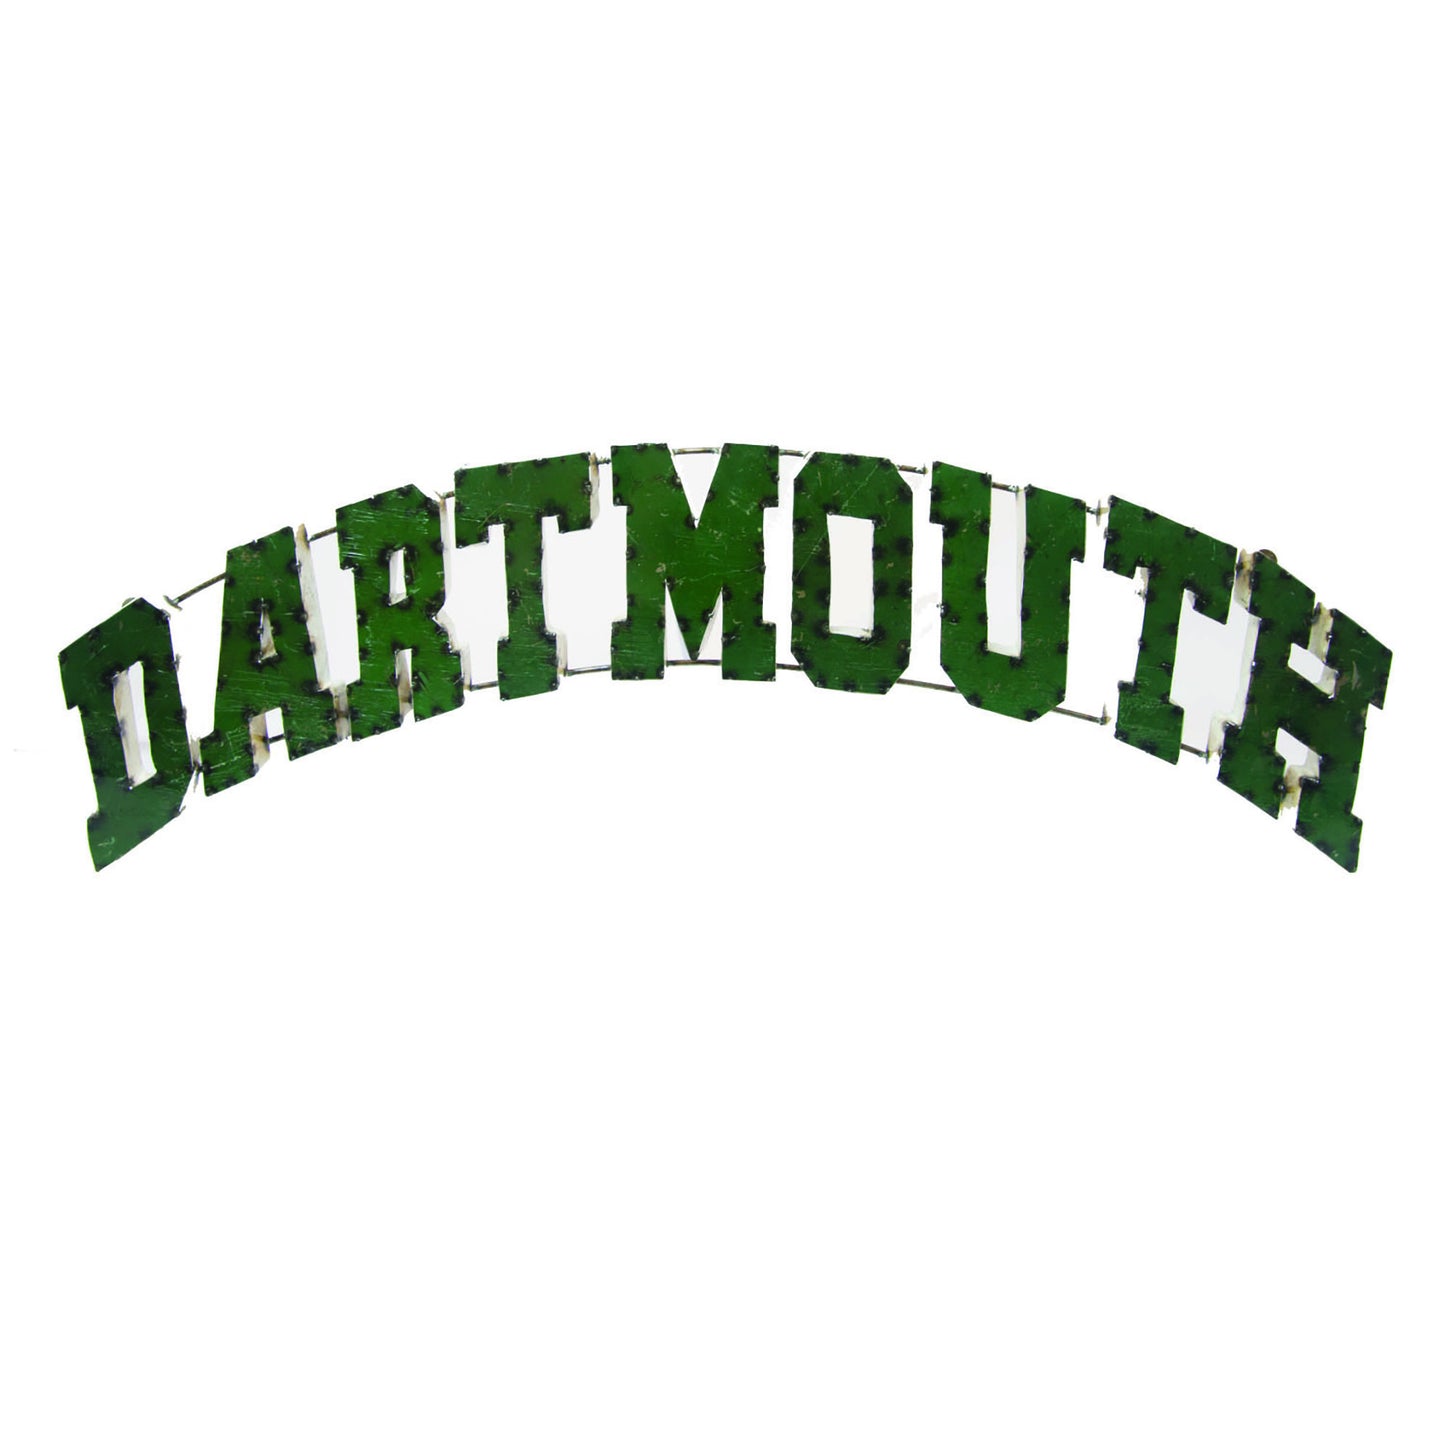 Dartmouth College "Dartmouth" Recycled Metal Wall Decor